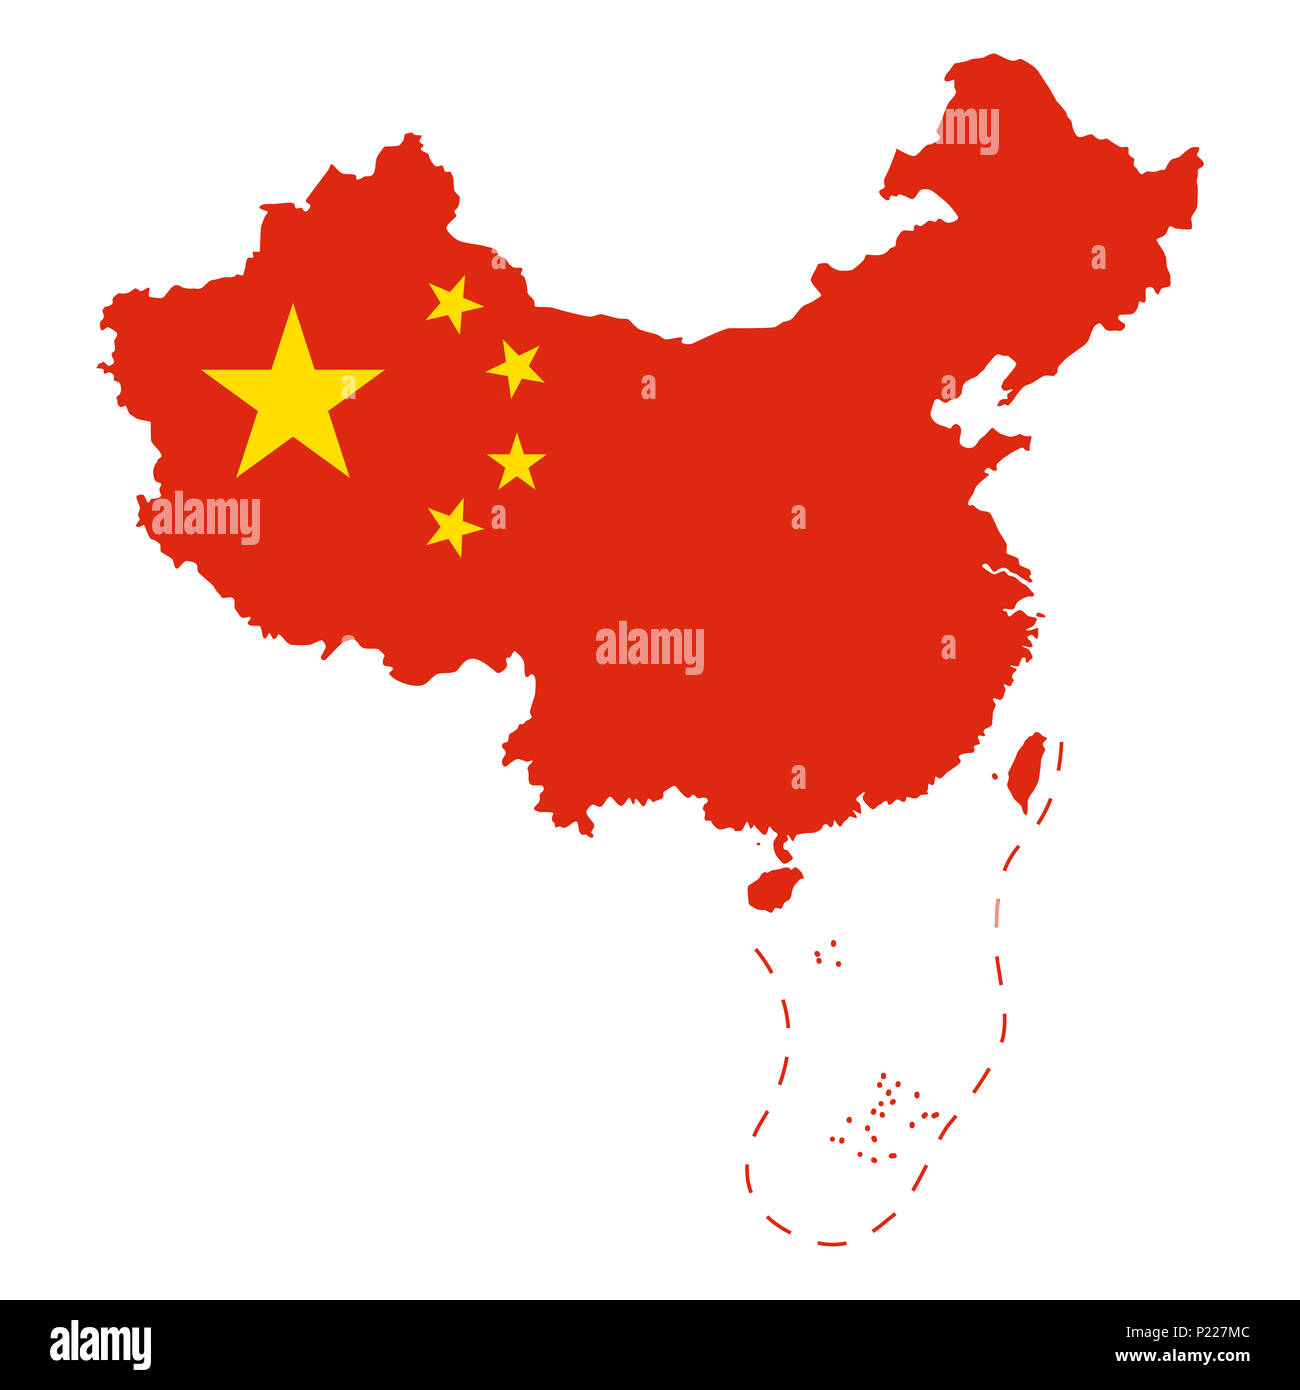 Flag of China in the country outline. Area controlled by the Peoples Republic of China, PRC, and claimed but uncontrolled regions. Five-star Red Flag. Stock Photo